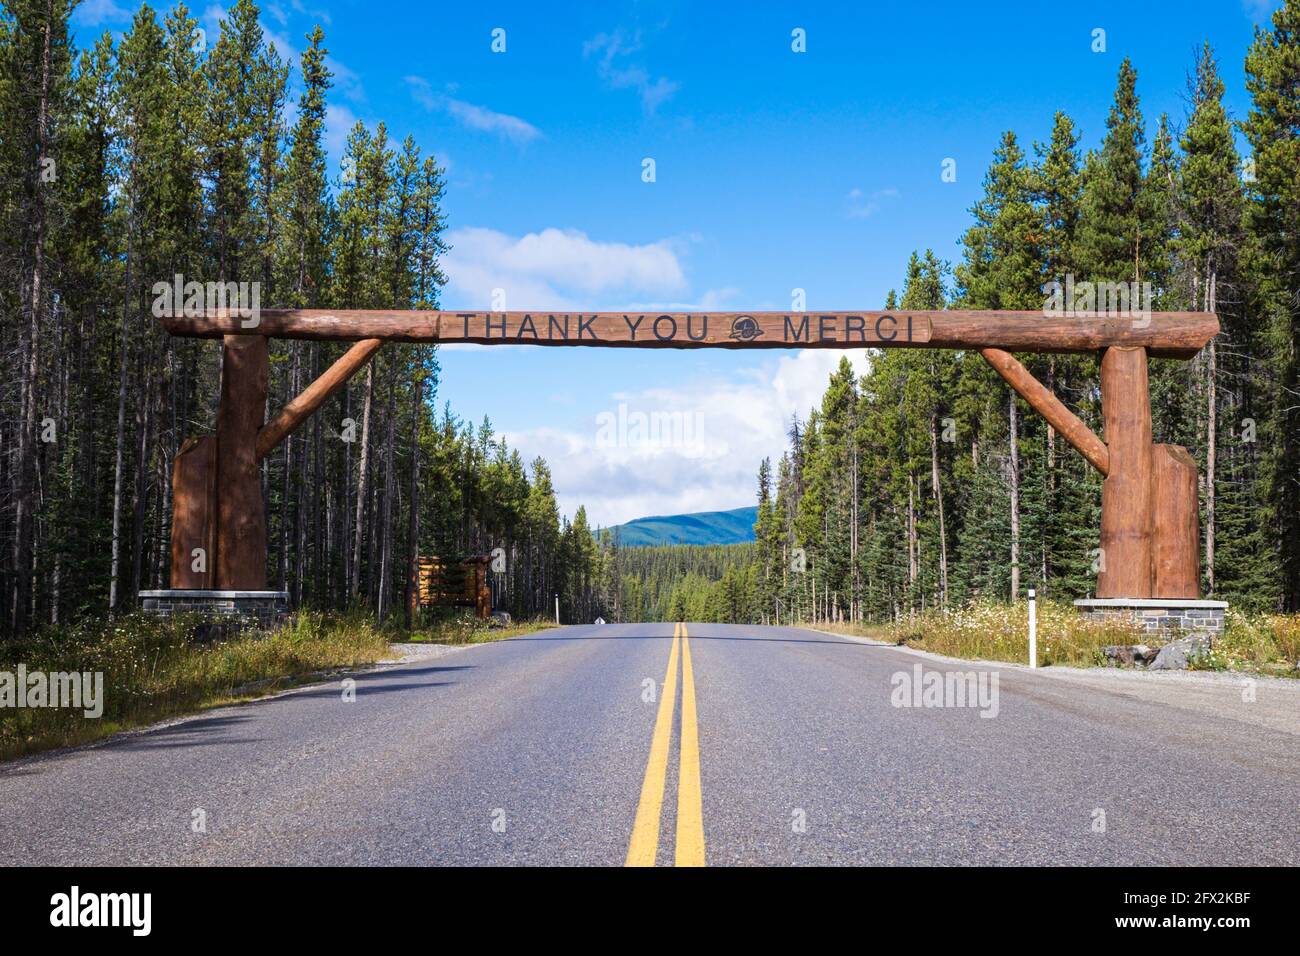 BANFF, ALBERTA, CANADA - 2016 SEPT 8: Sign on the road between Banff and Lake Louise saying Thank You and Merci on a wooden beam gate, road with two y Stock Photo